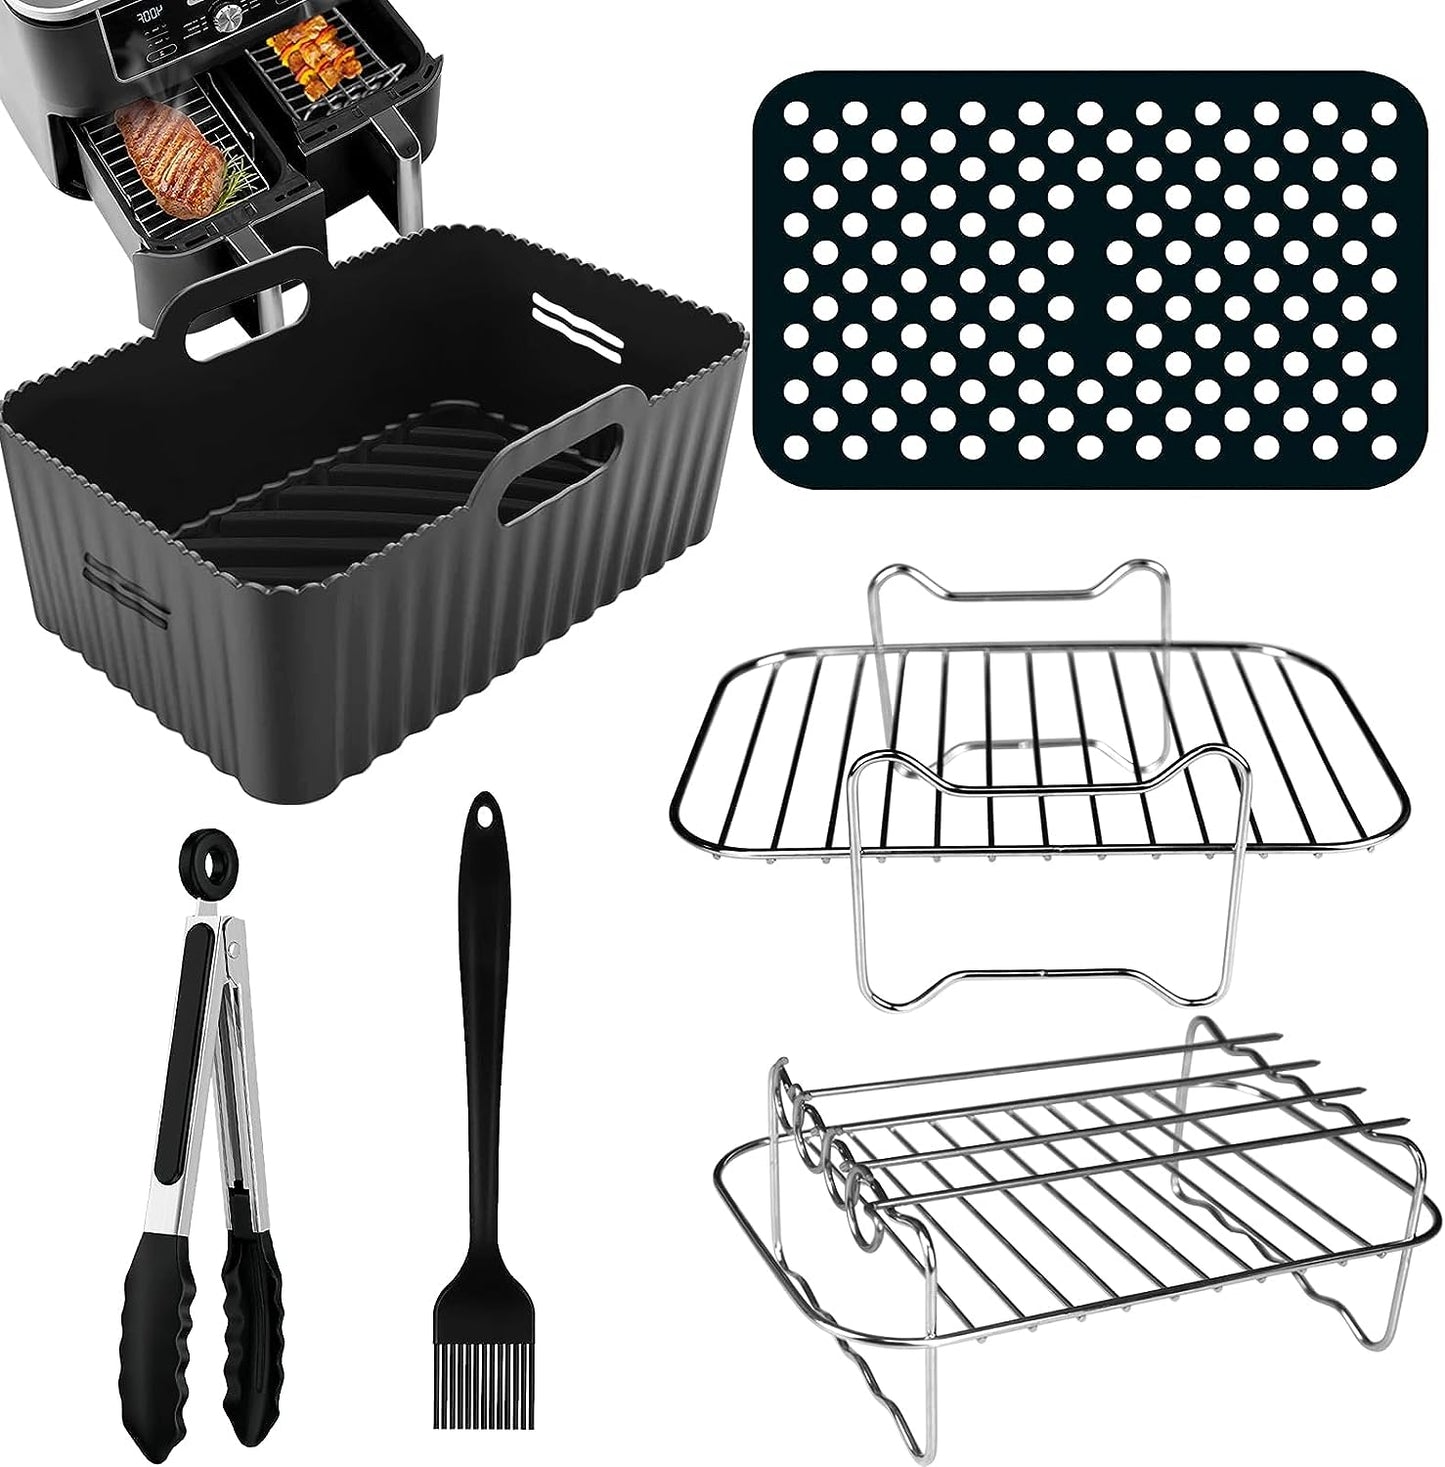 Dual Air Fryer Accessories 6Pcs Set With Racks Compatible Ninja Foodi and Others